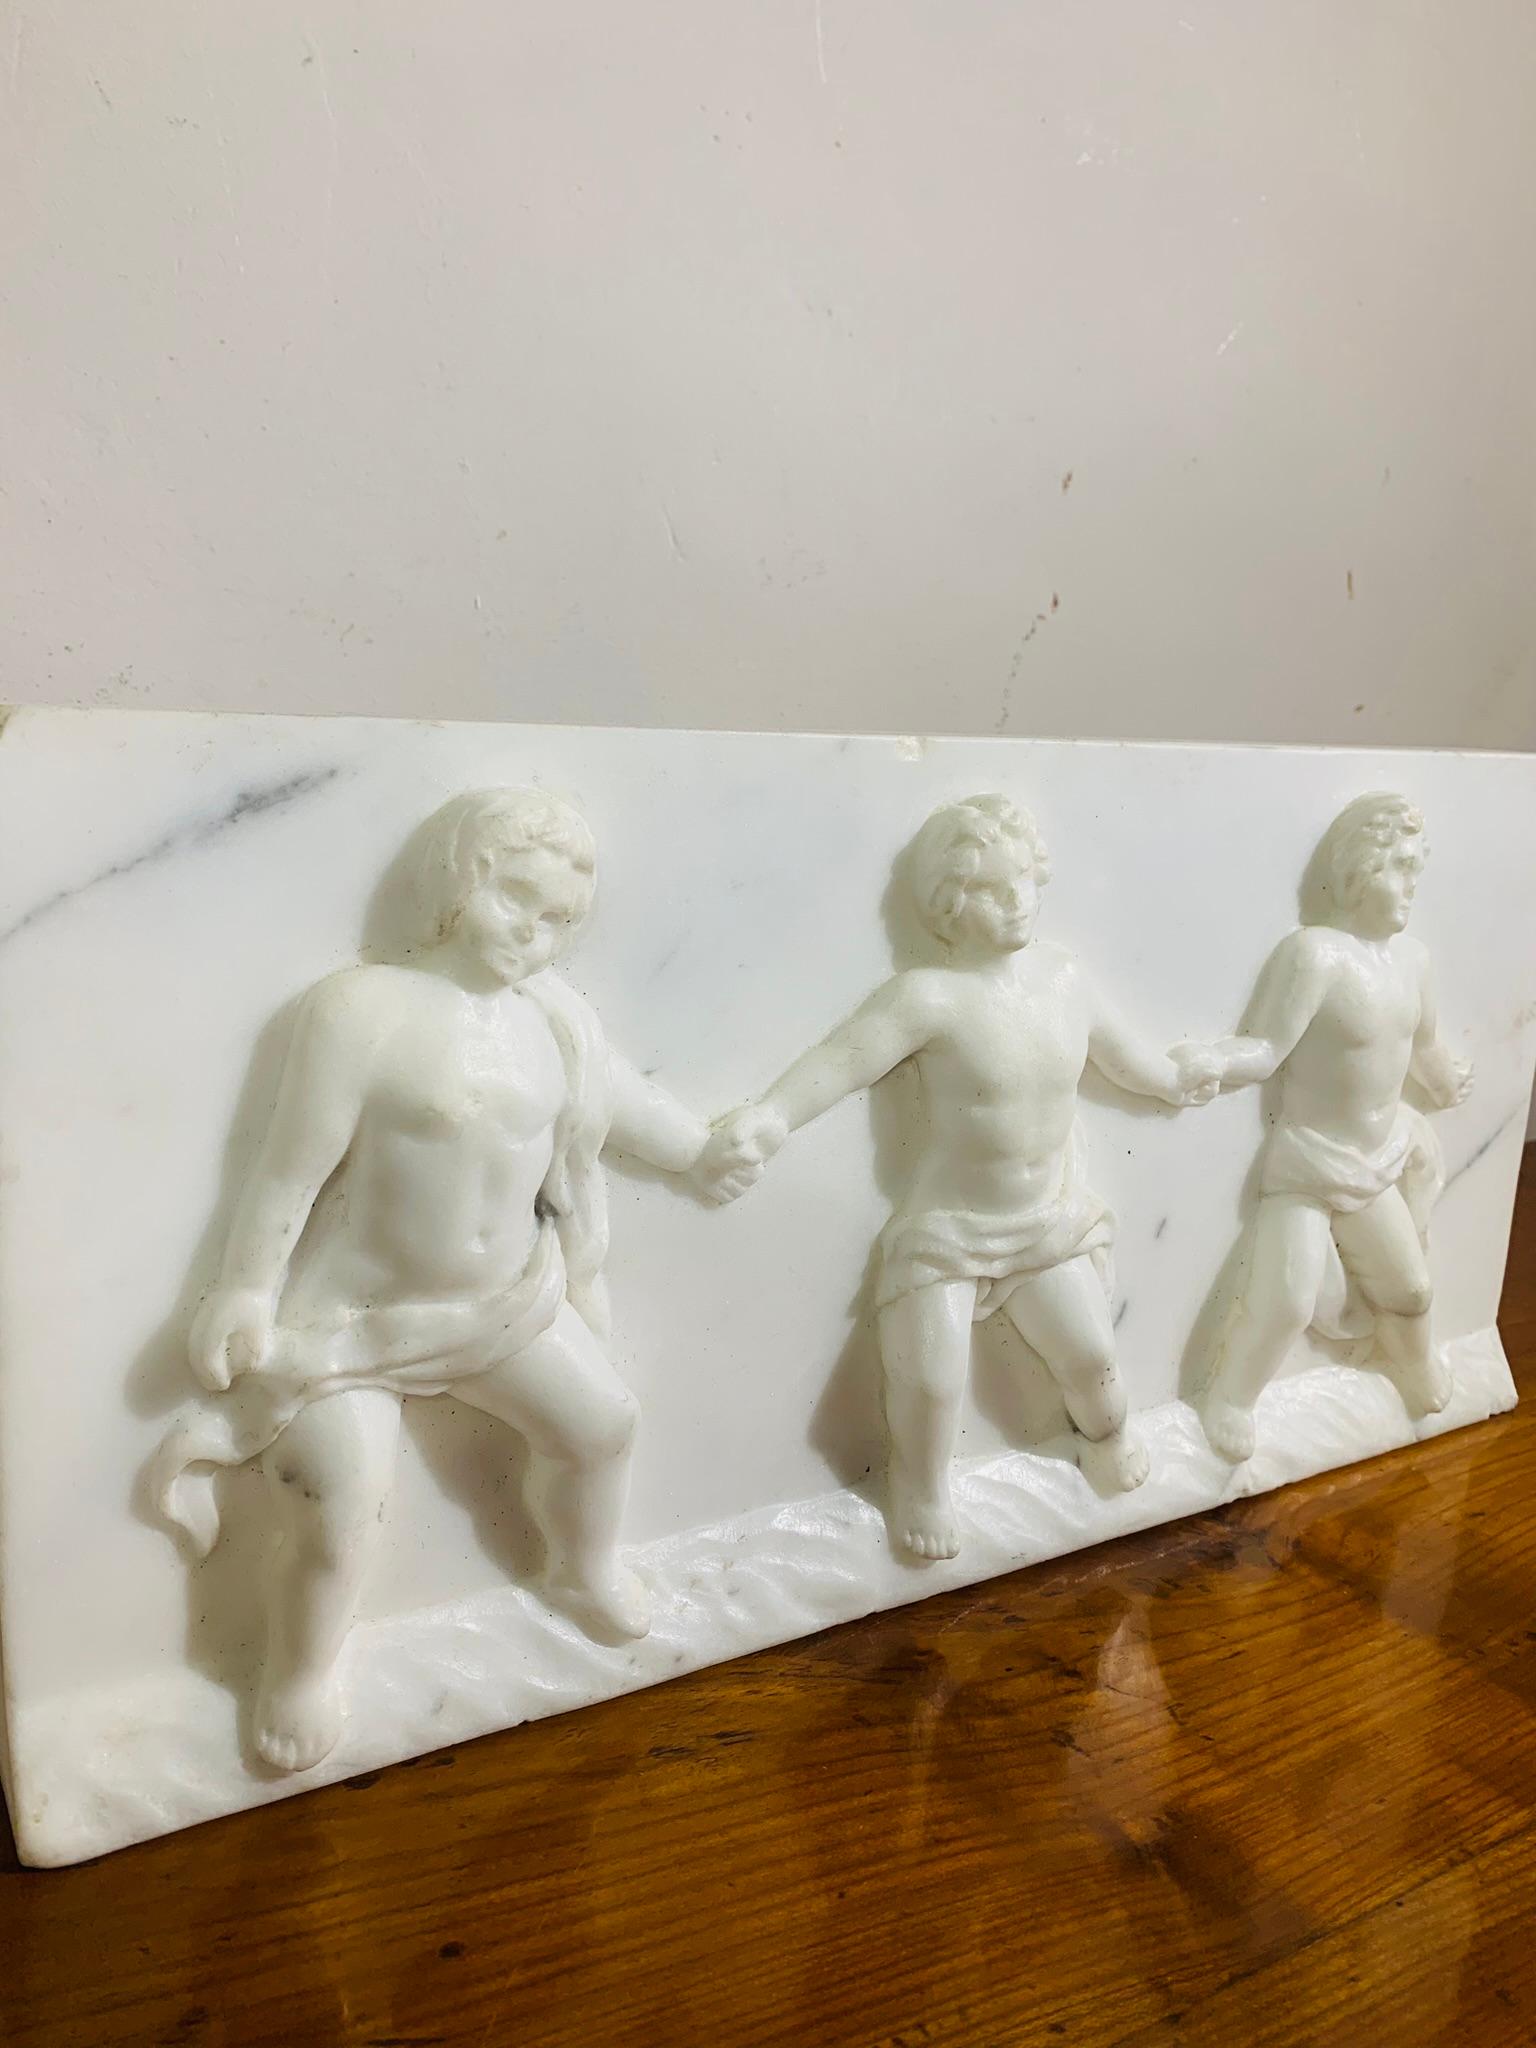 Beautiful bas-relief in white Carrara marble depicting the allegory of Friendship. It features three sculpted putti holding hands.
Slightly protruding base.